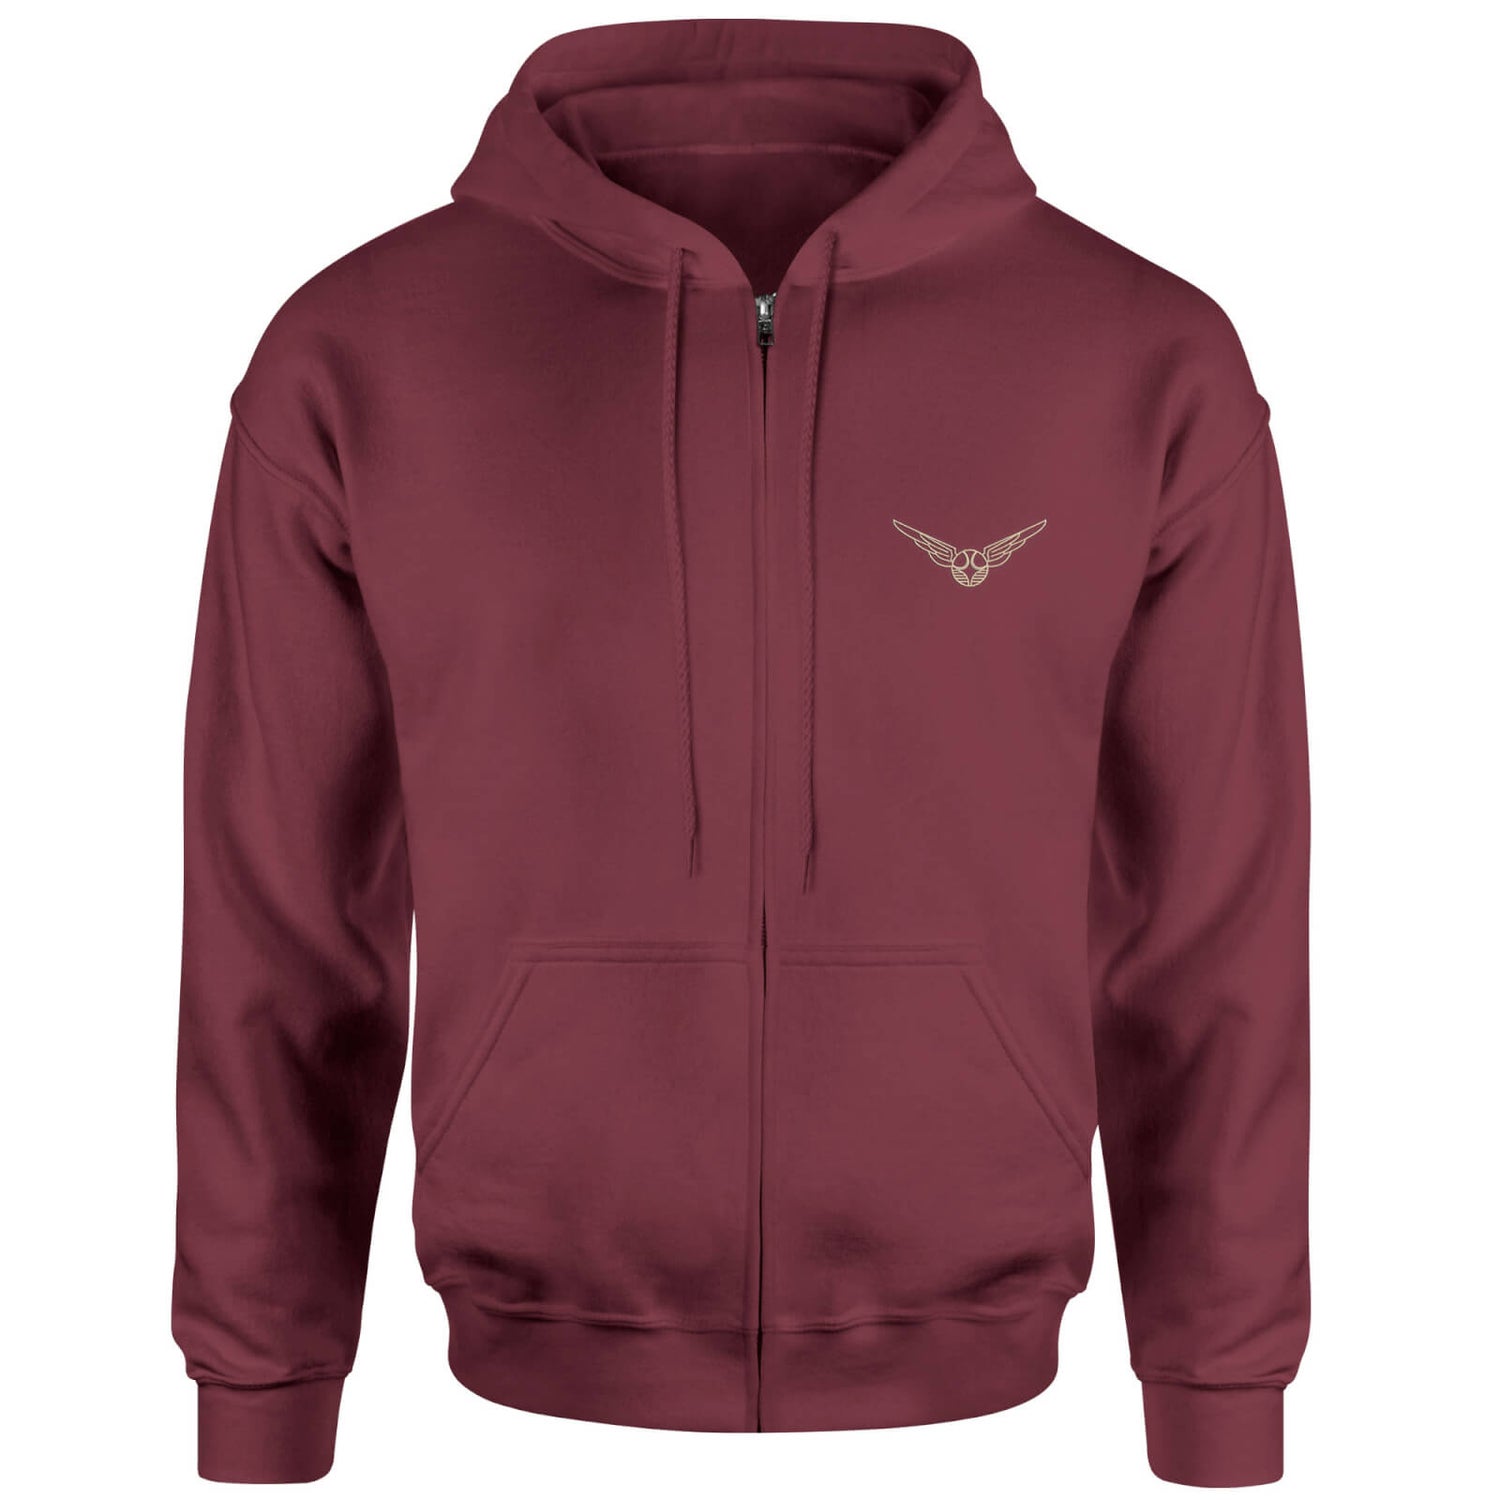 Harry Potter Golden Snitch Embroidered Unisex Zipped Hoodie - Burgundy